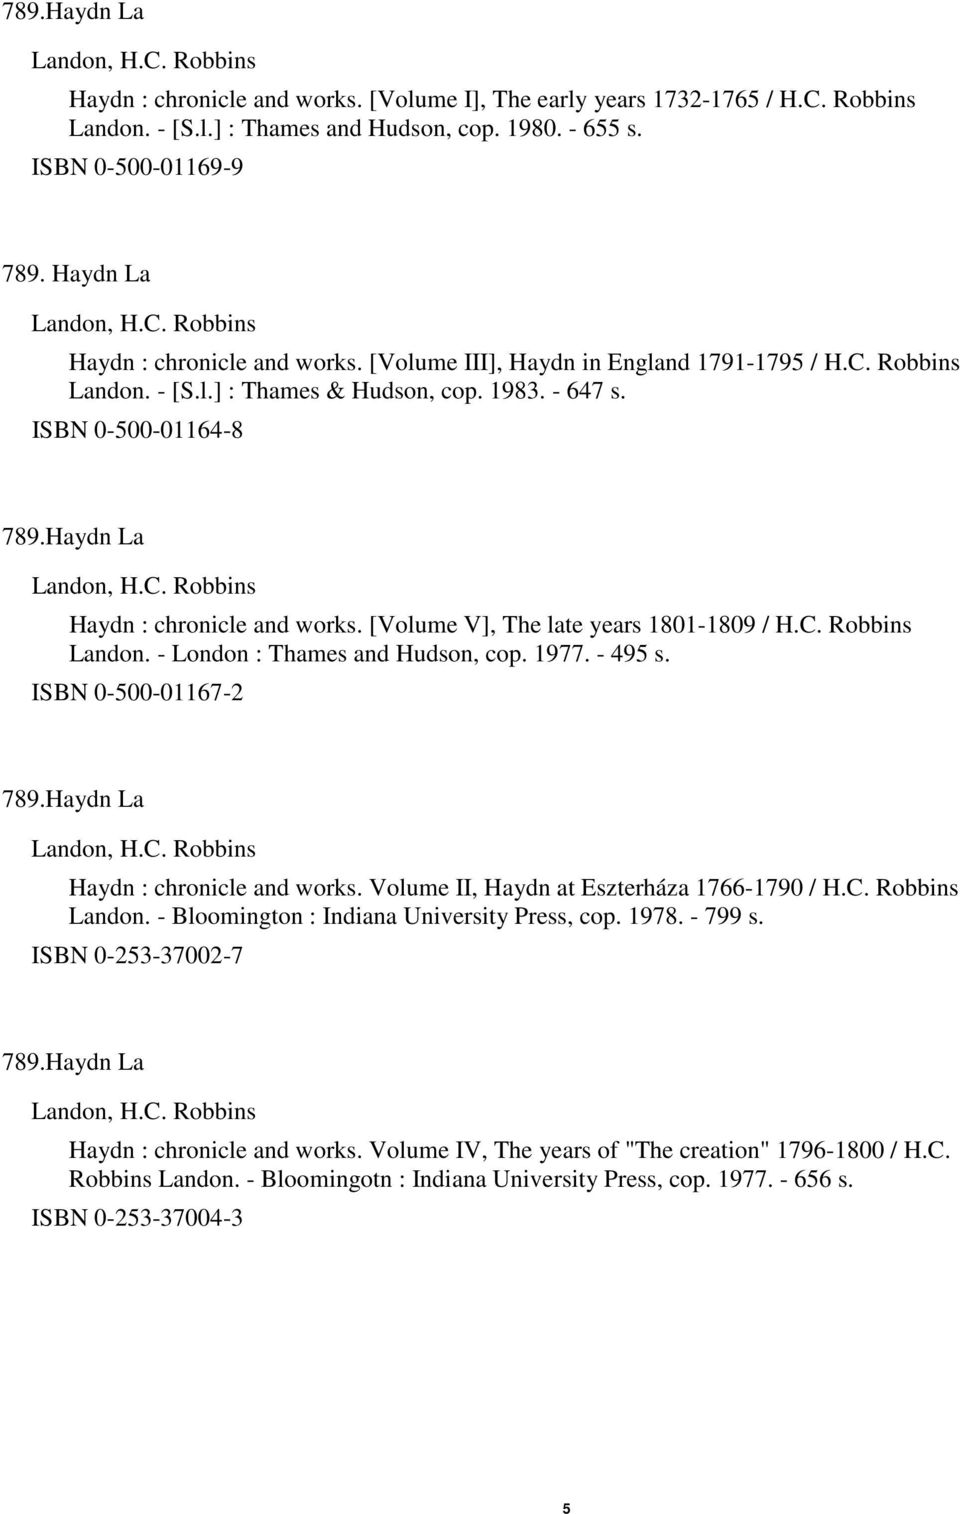 [Volume V], The late years 1801-1809 / H.C. Robbins Landon. - London : Thames and Hudson, cop. 1977. - 495 s. ISBN 0-500-01167-2 Haydn : chronicle and works.